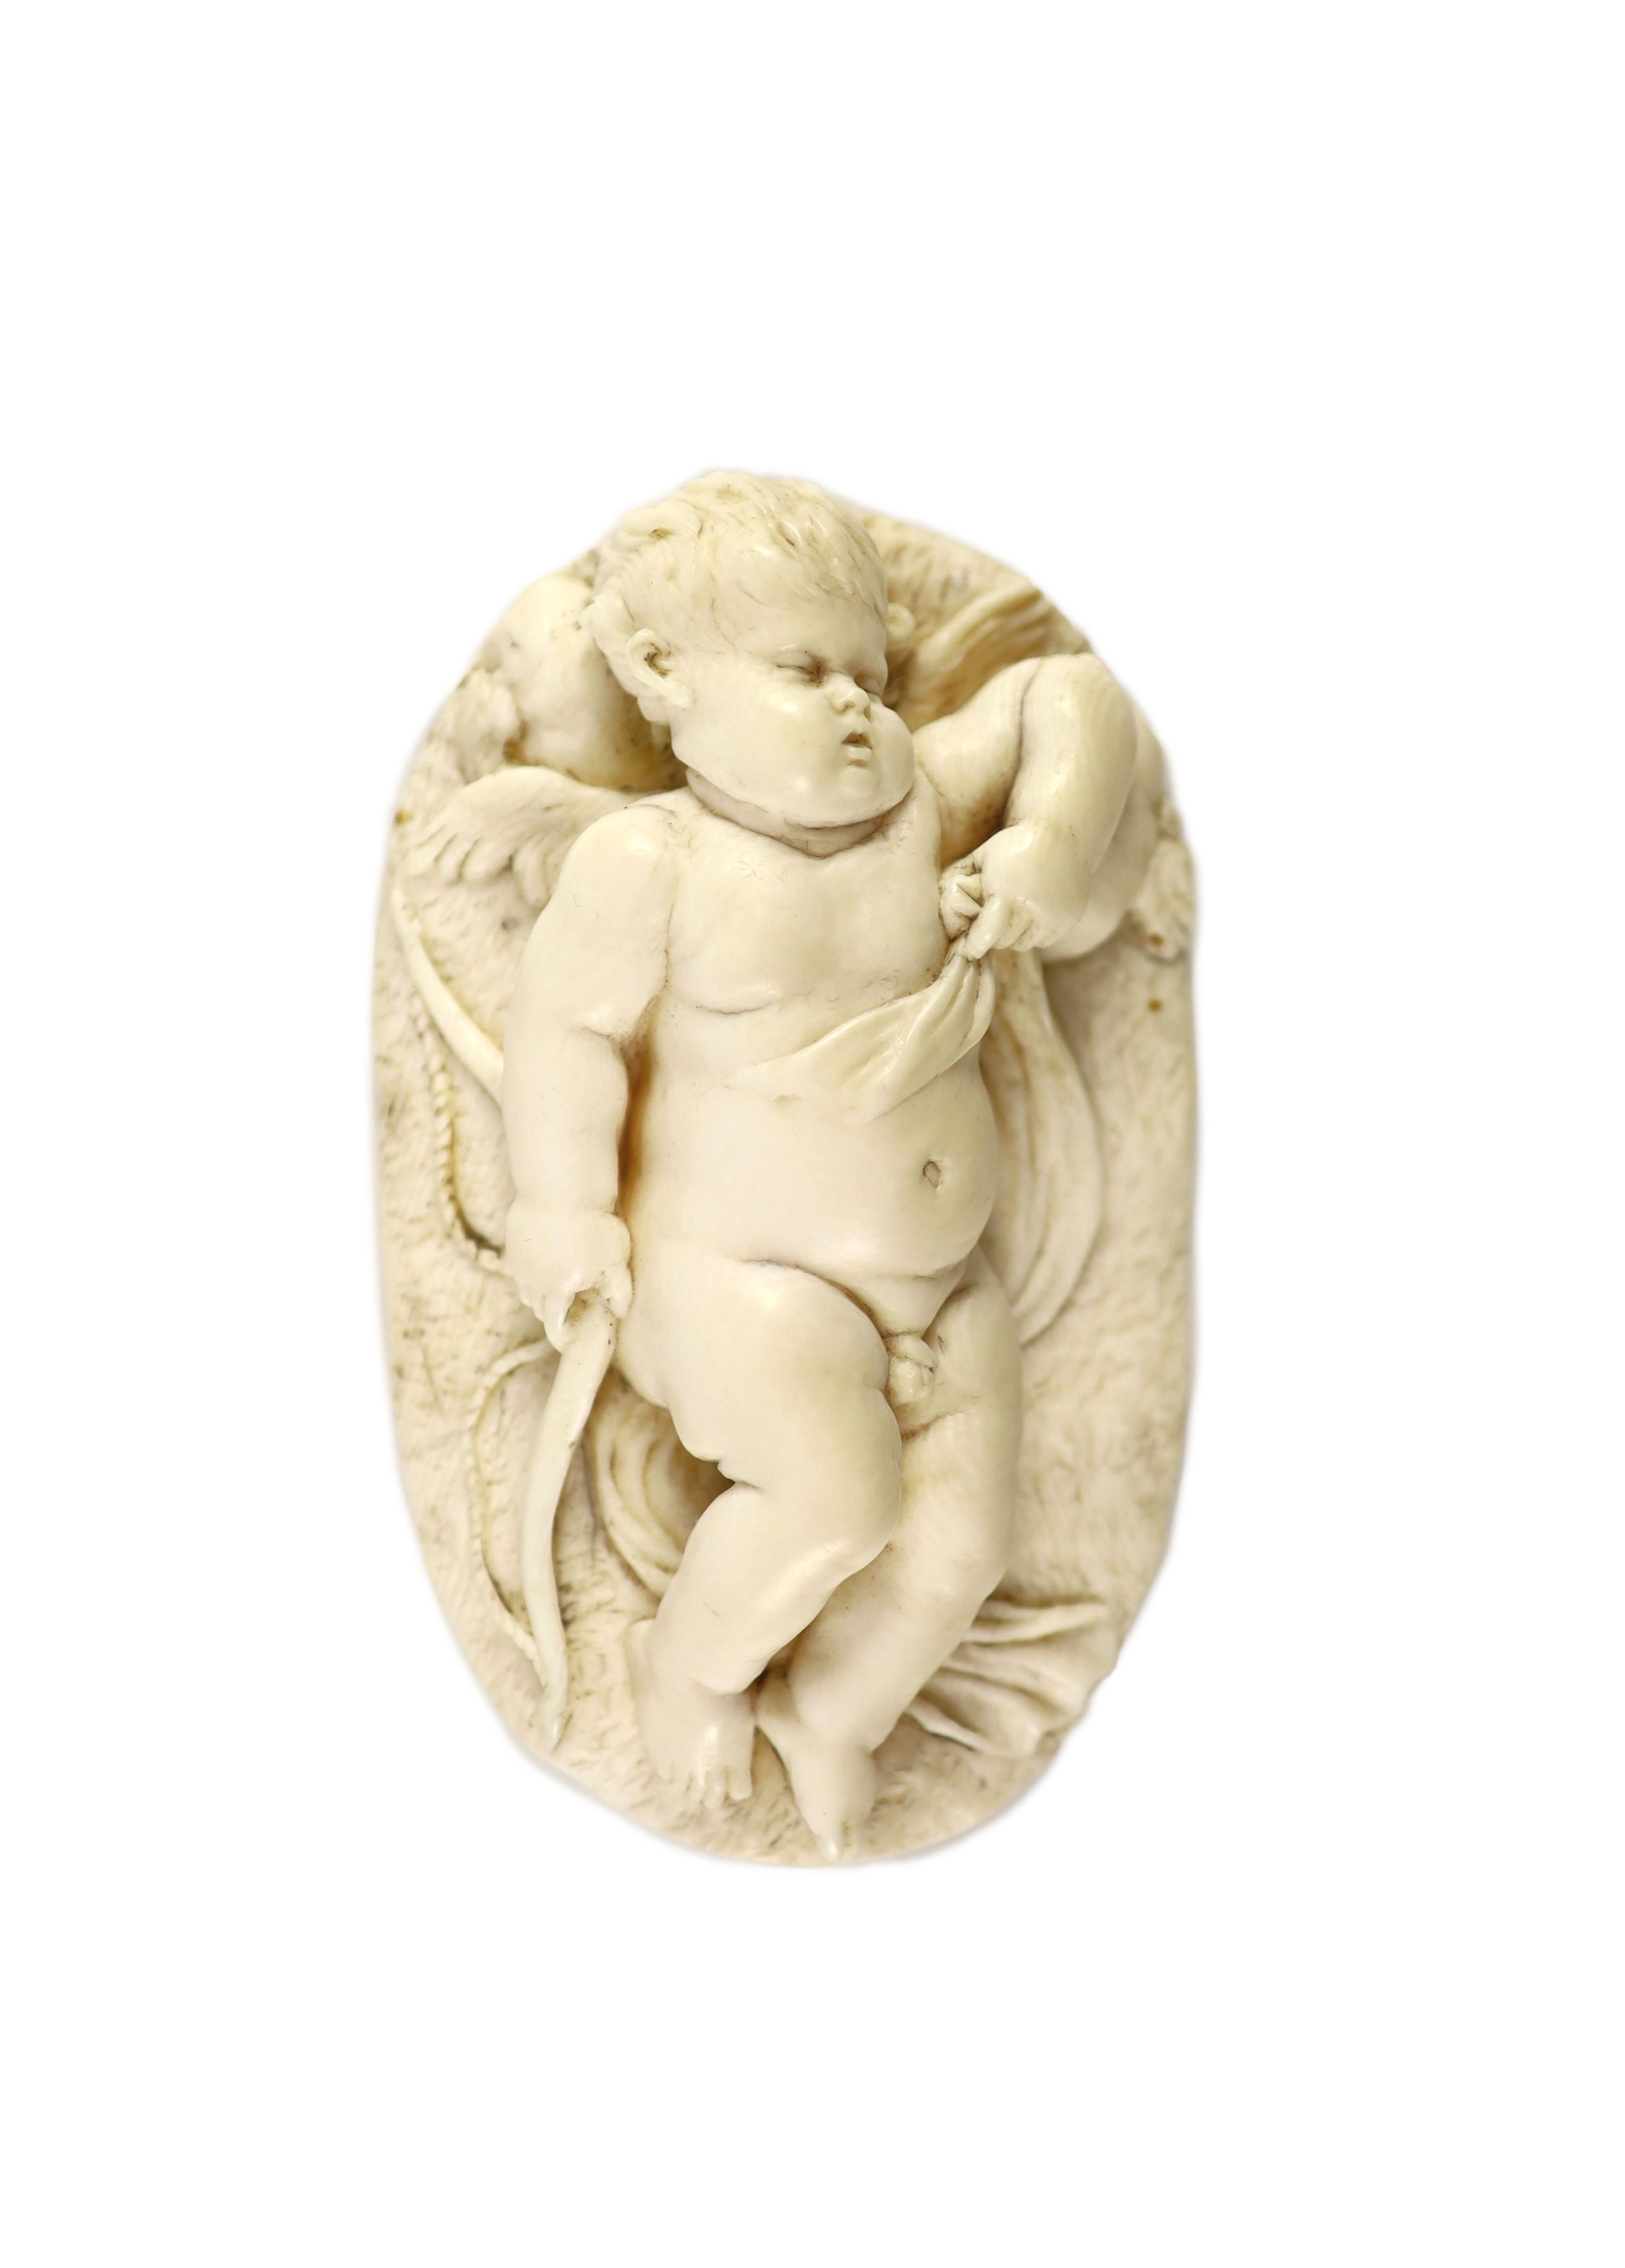 After Francois du Quesnoy (1594-1643). An oval ivory relief of sleeping Cupid, possibly Netherlandish 17th/18th century, 11 x 6.5cm height 2.5cm